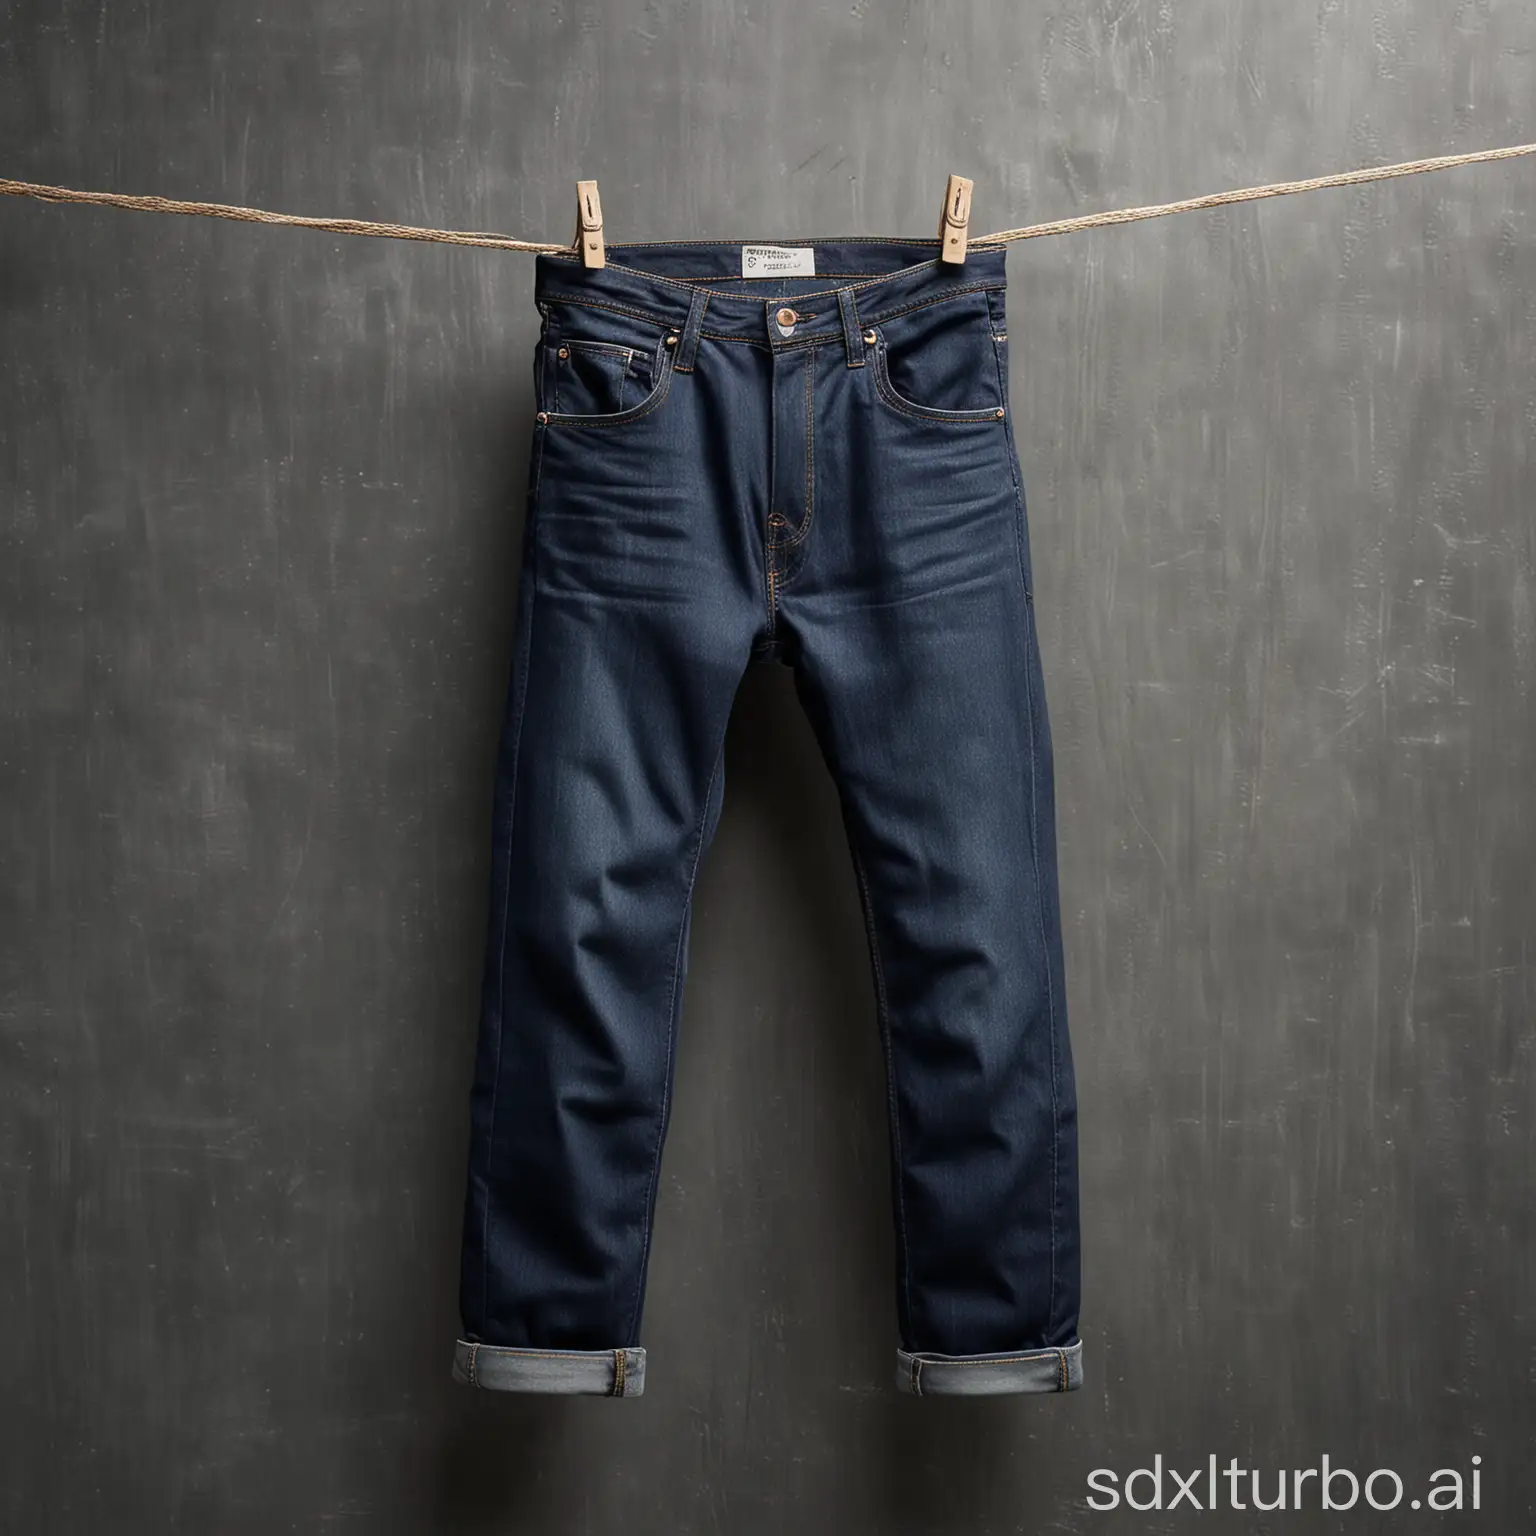 A pair of dark blue jeans hanging on a clothesline. The jeans are made of a thick, durable denim and have a classic five-pocket design. The light shining on the jeans highlights their rich color and texture.